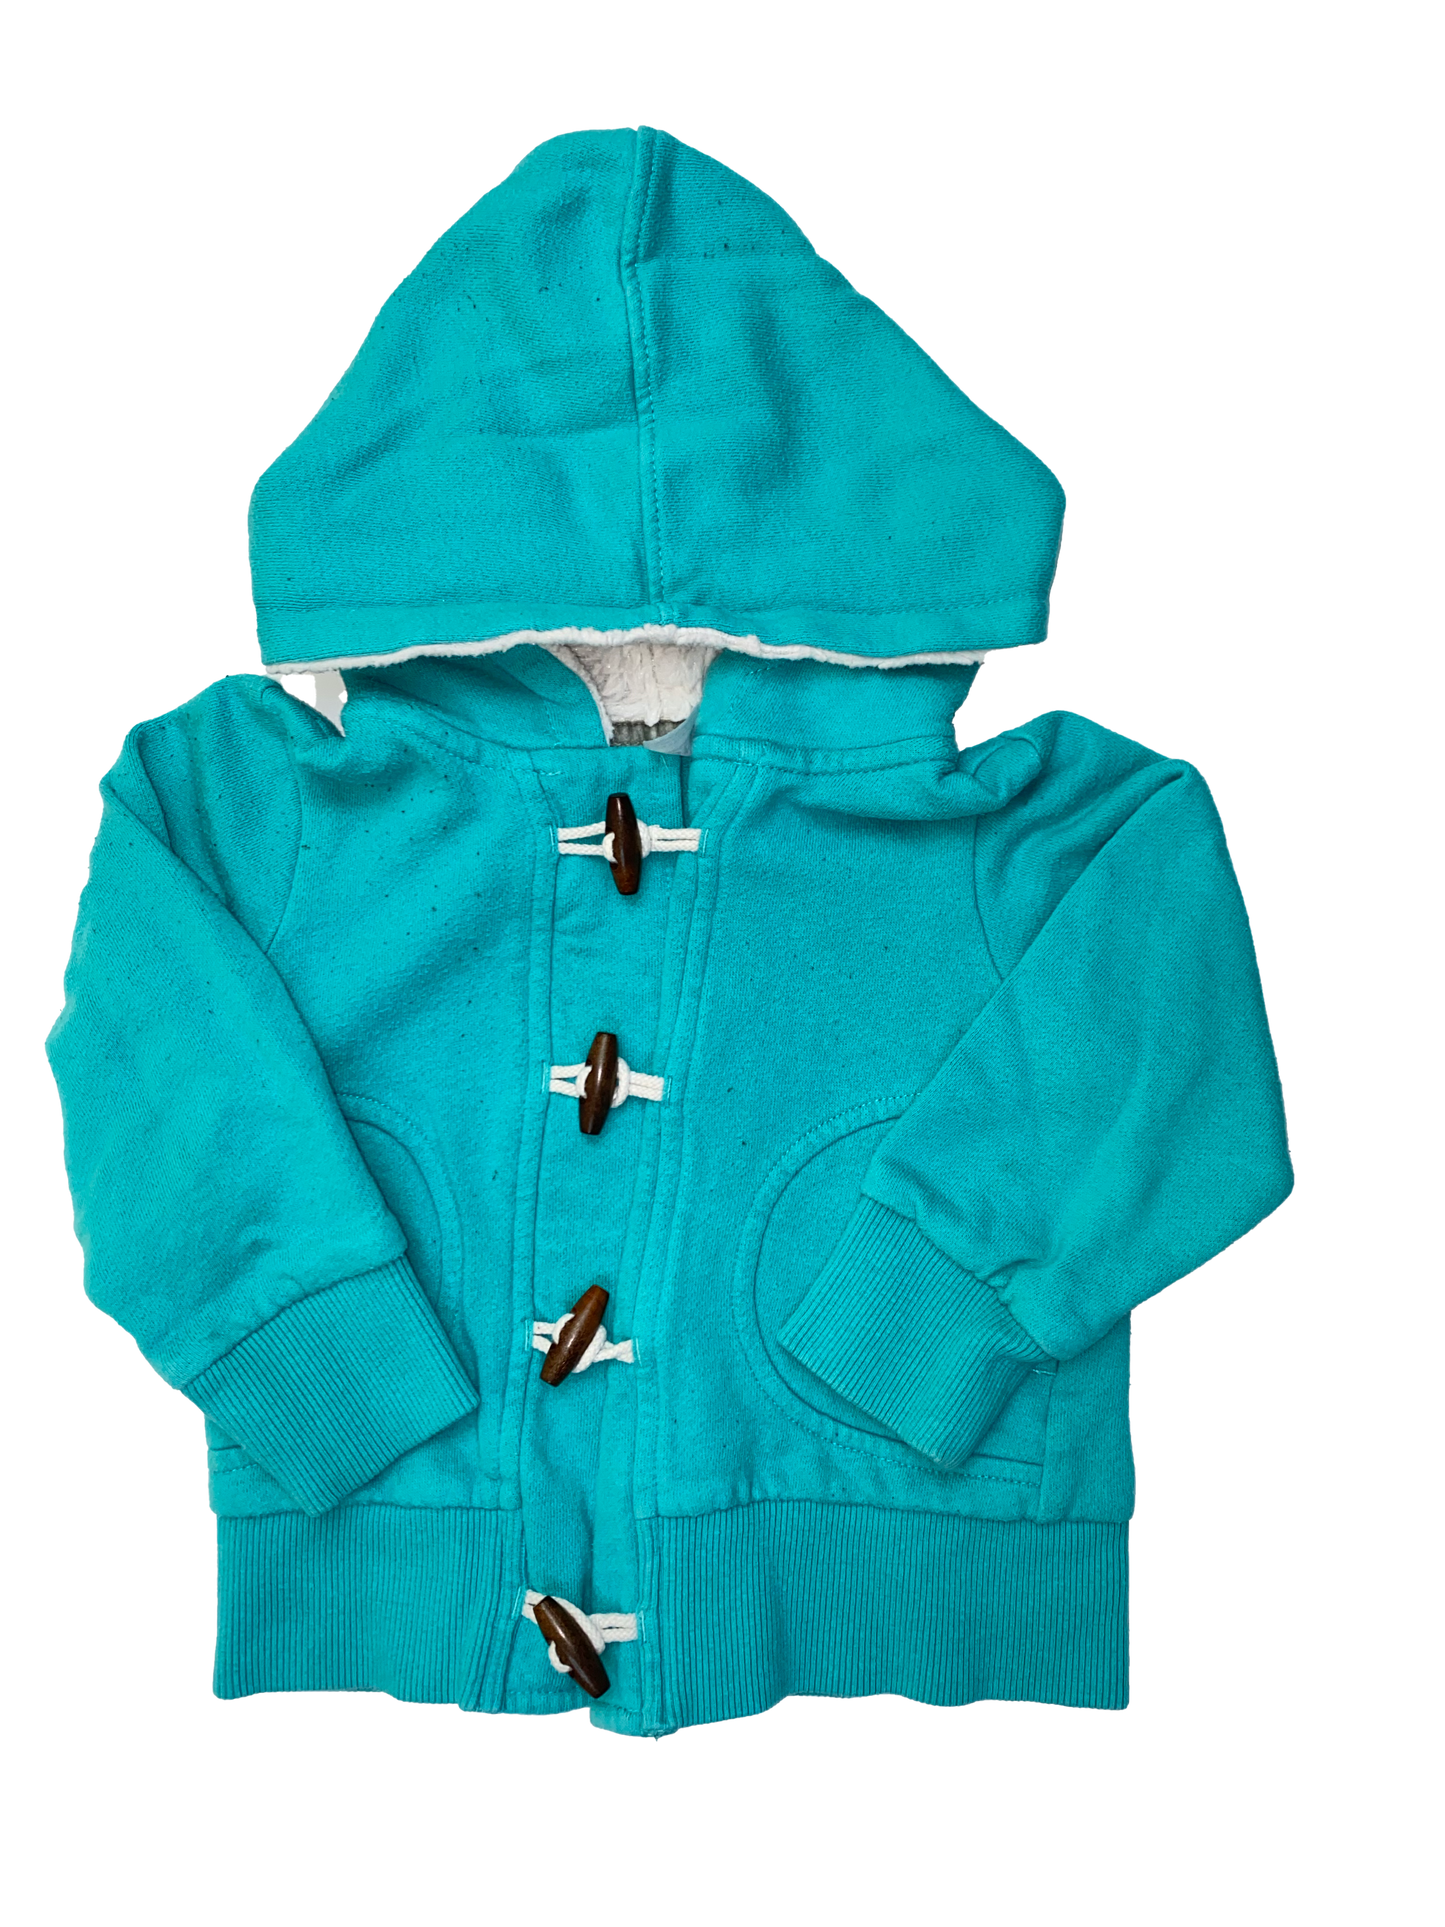 Carter's Teal Jacket with Toggle Buttons 3T